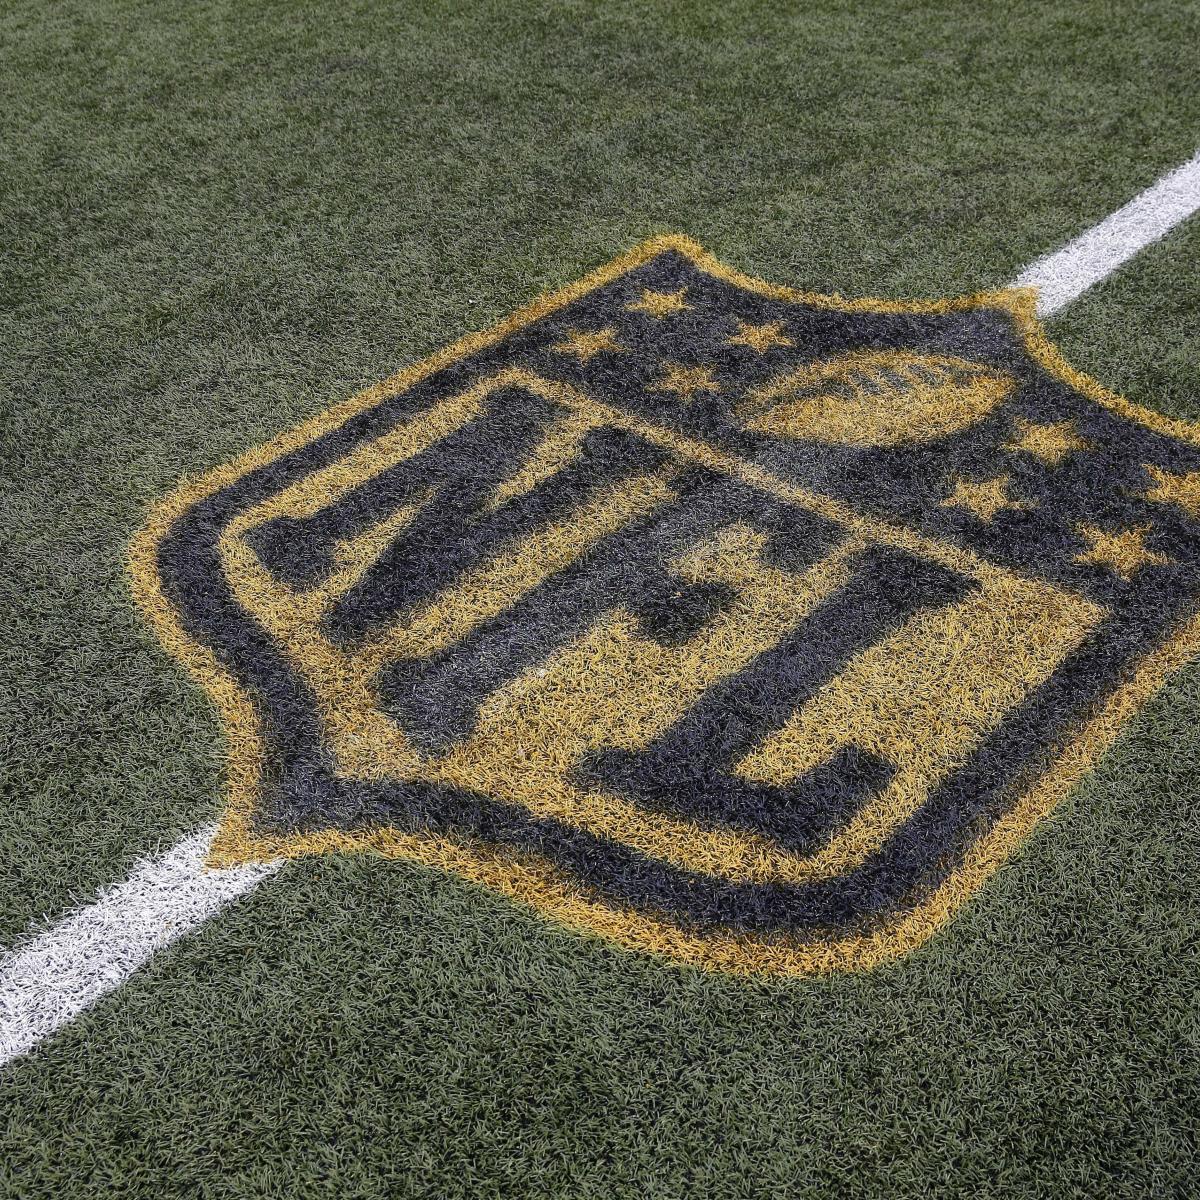 NFL Projects 2016 Salary Cap to Be Between $150-$153.4 Million | News ...